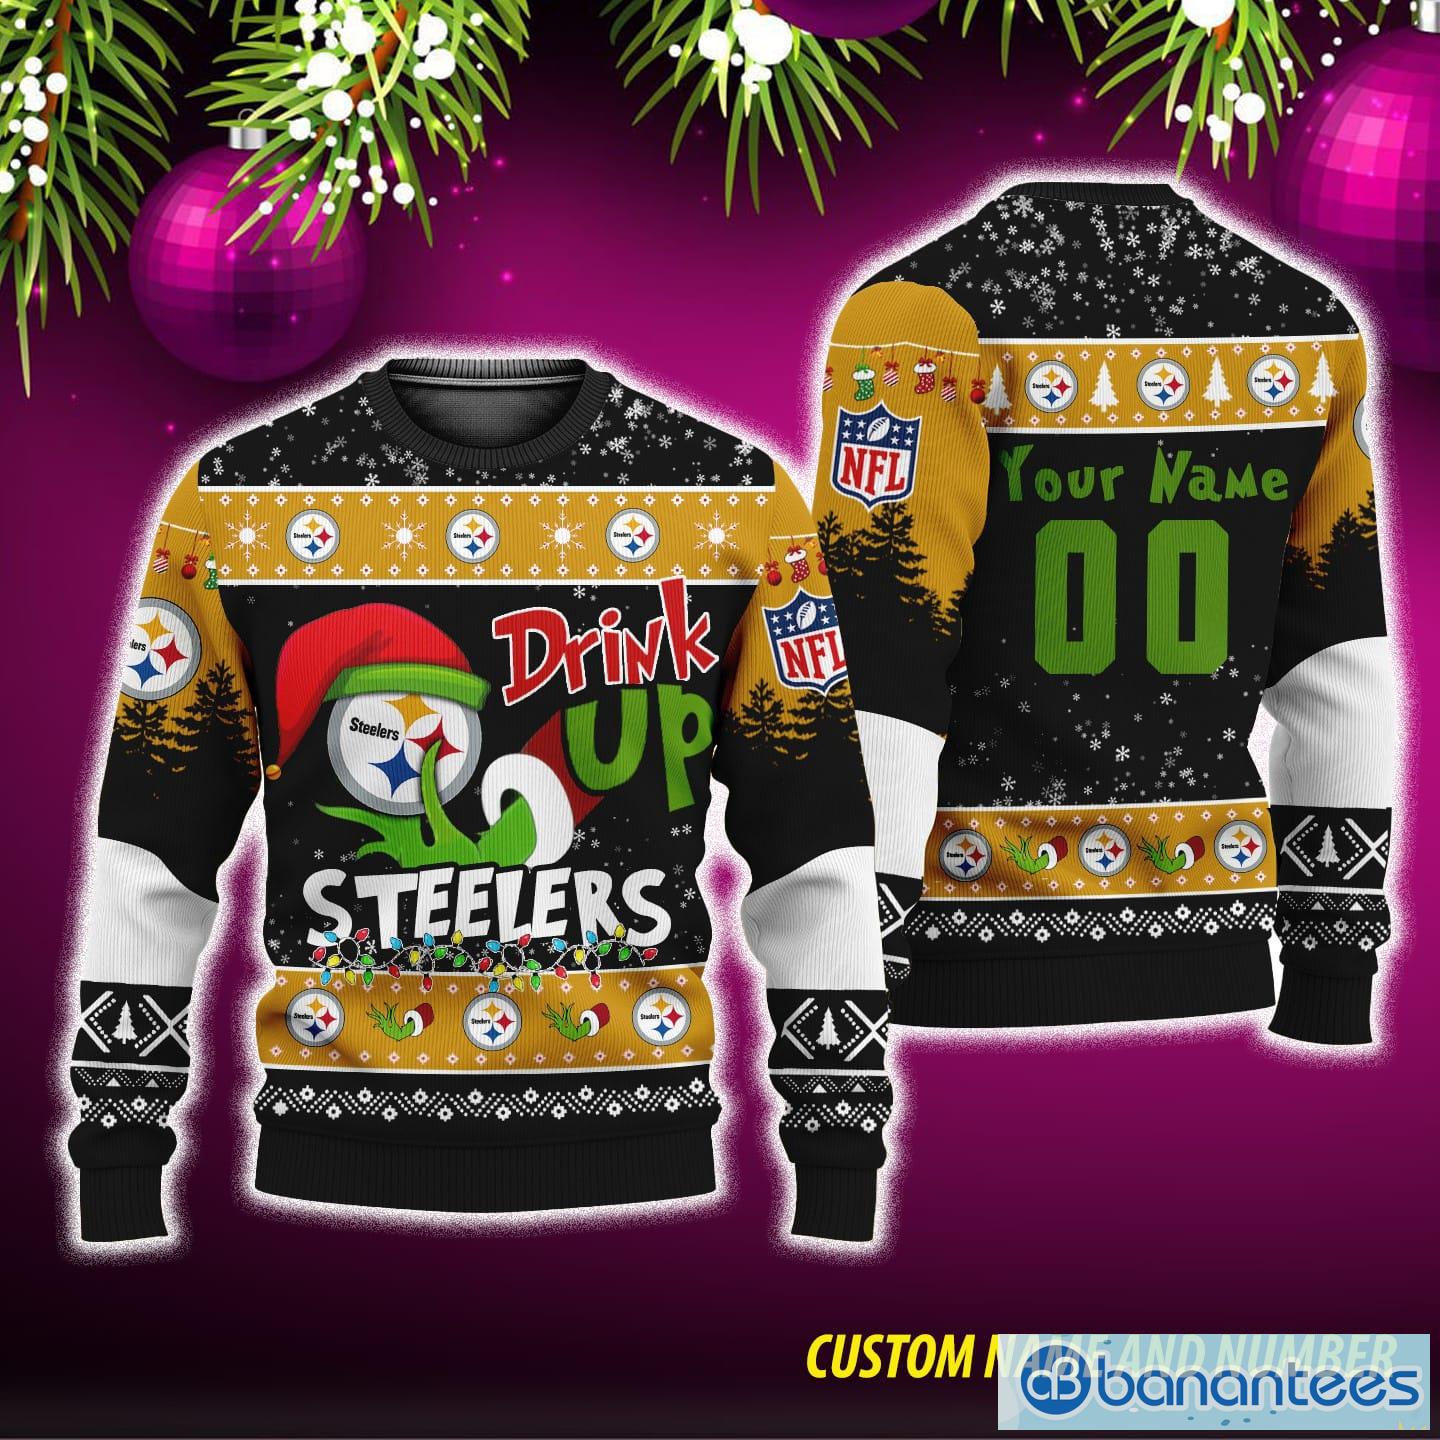 NFL Grinch Drink Up Pittsburgh Steelers Ugly Christmas Sweater Custom Number And Name - NFL Grinch Drink Up Pittsburgh Steelers Ugly Christmas Sweater Custom Number And Name